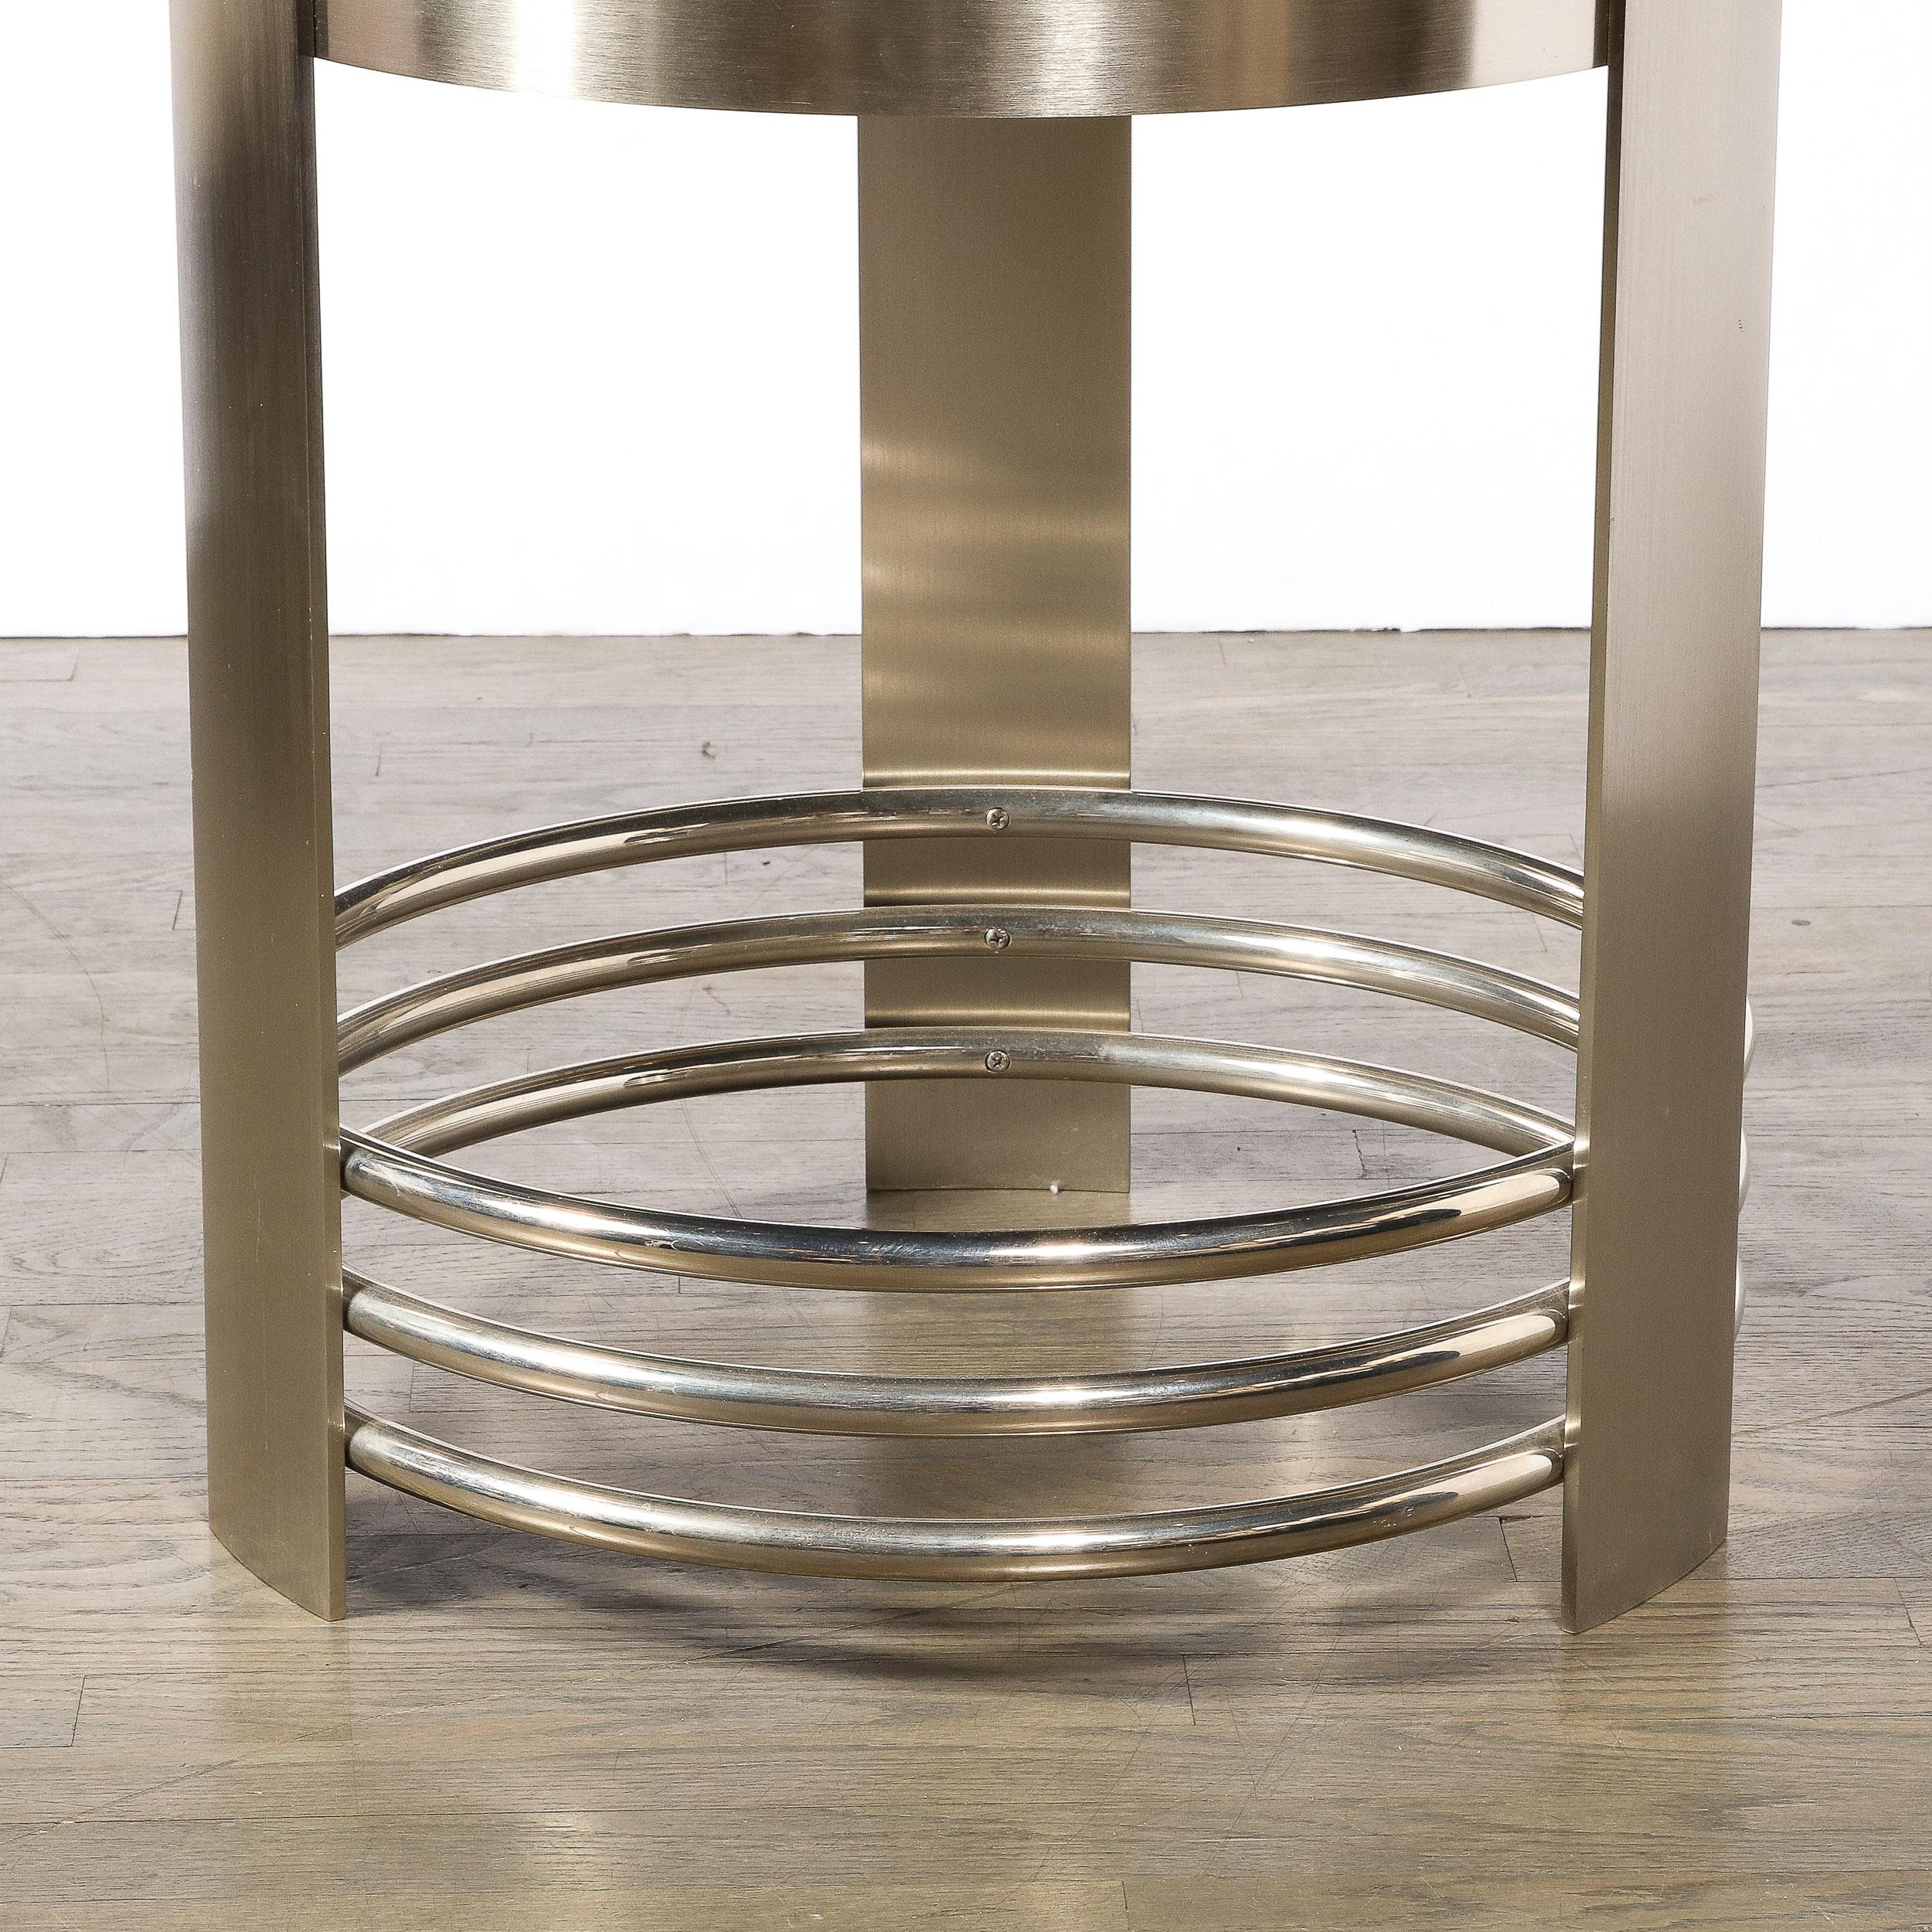 American Art Deco Revival Occasional Table in Brushed Nickel with Polished Banding